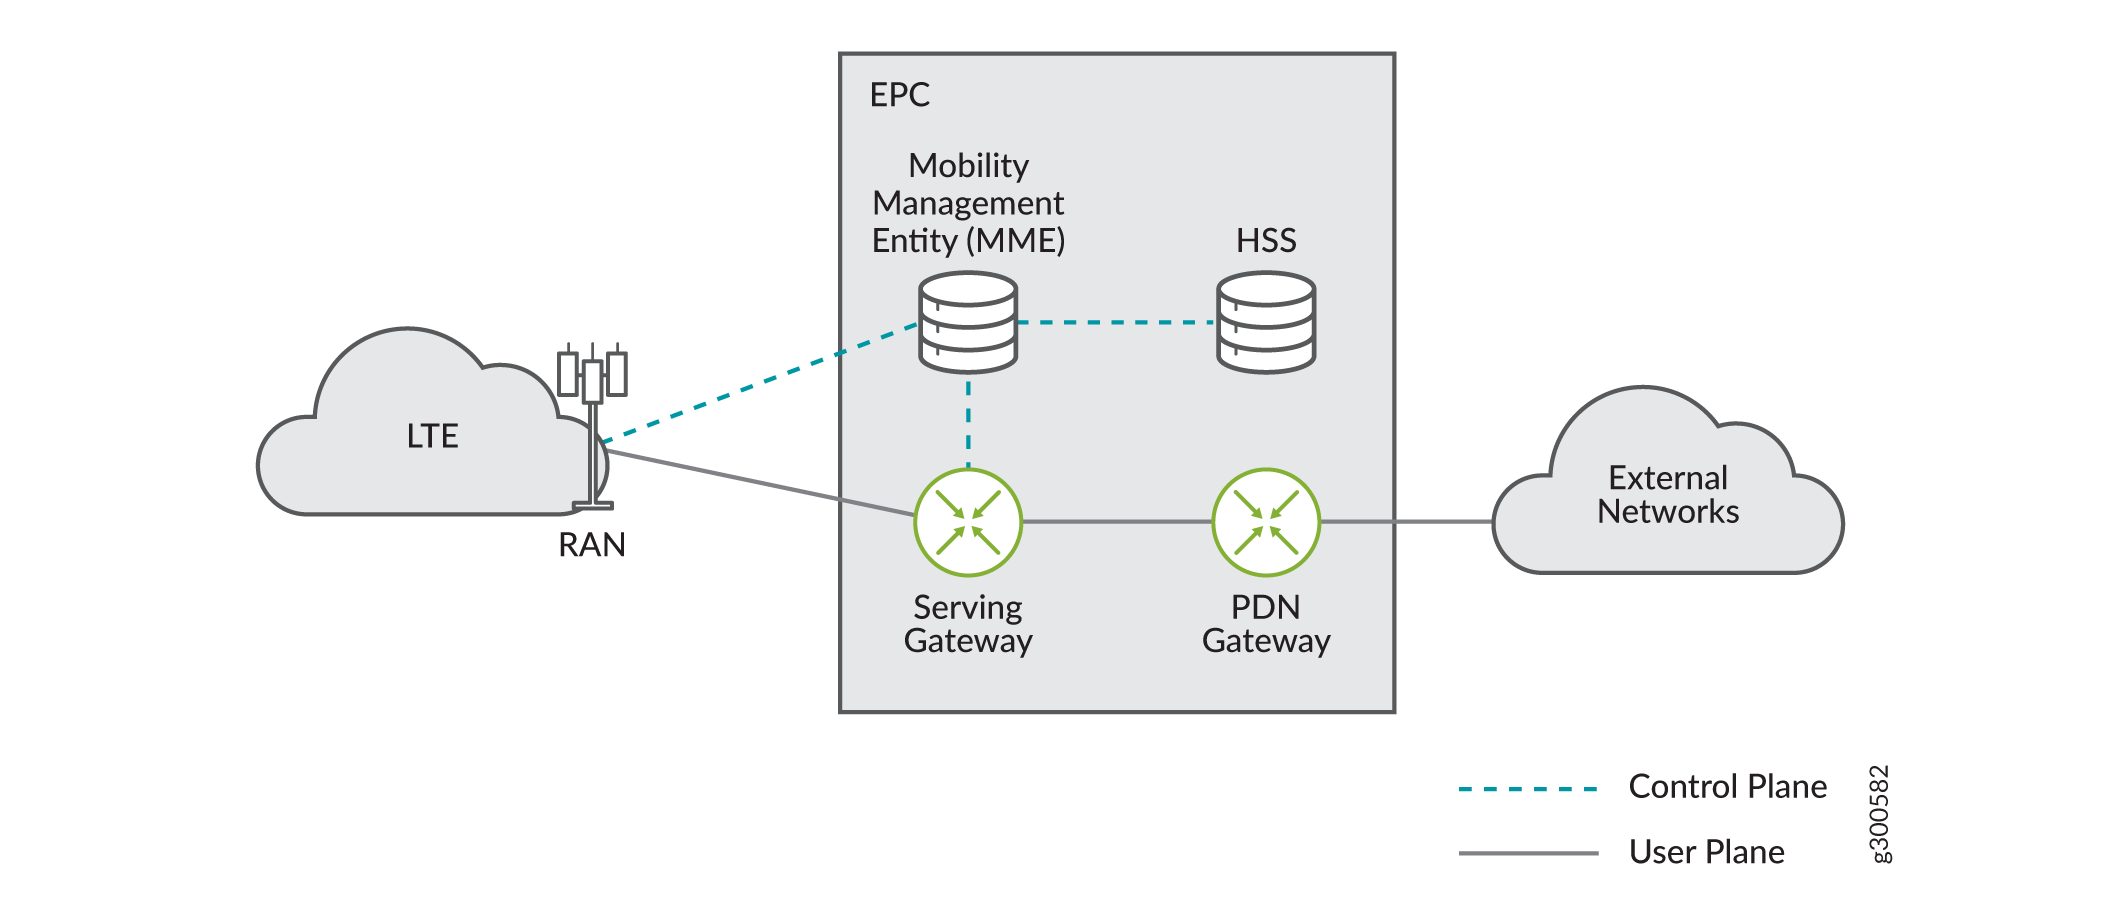 3GPP
Release 8 Evolved Packet Core Architecture